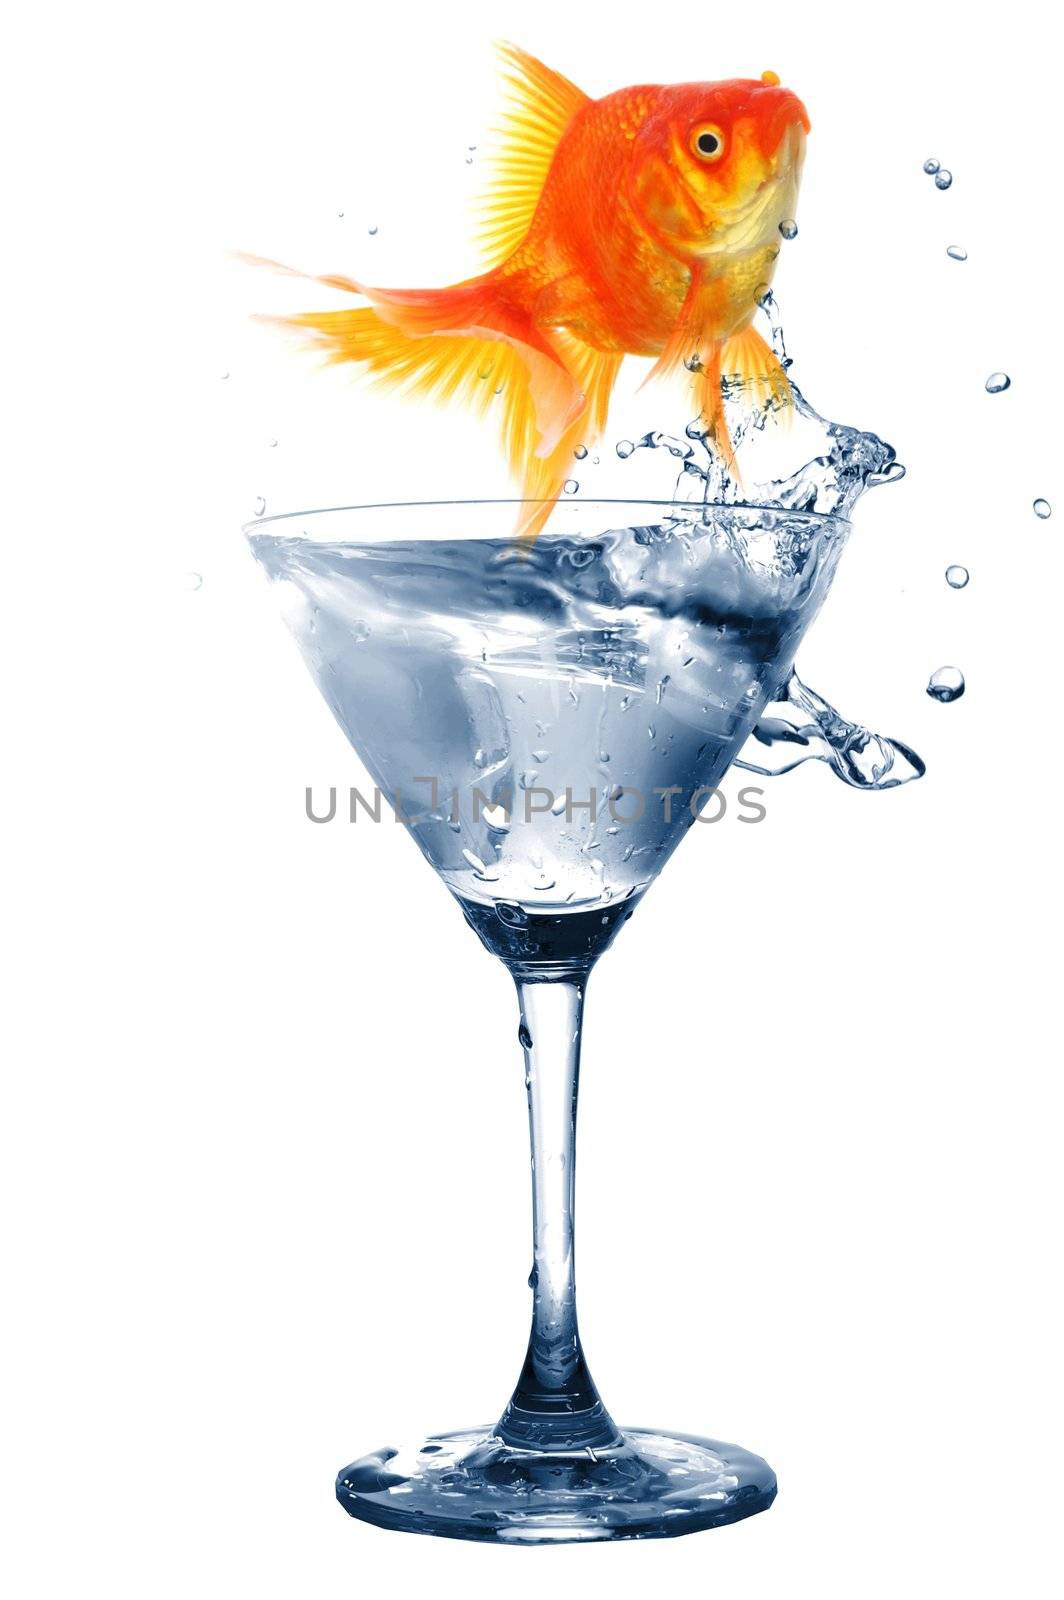 goldfish in glass of water showing challenge or creativity concept